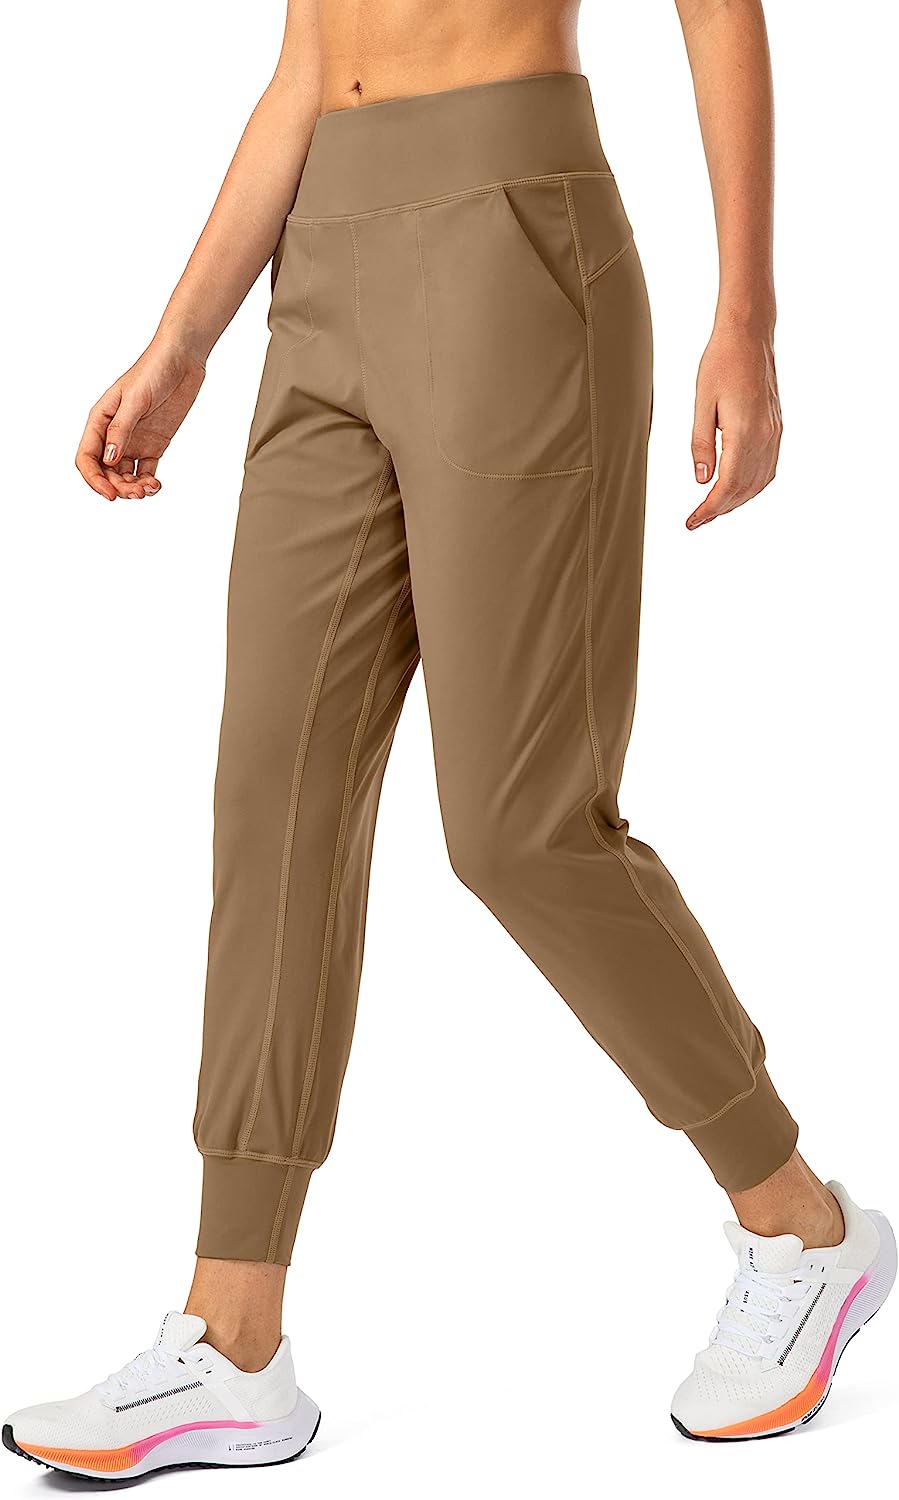  Soothfeel Women's Joggers with Zipper Pockets High